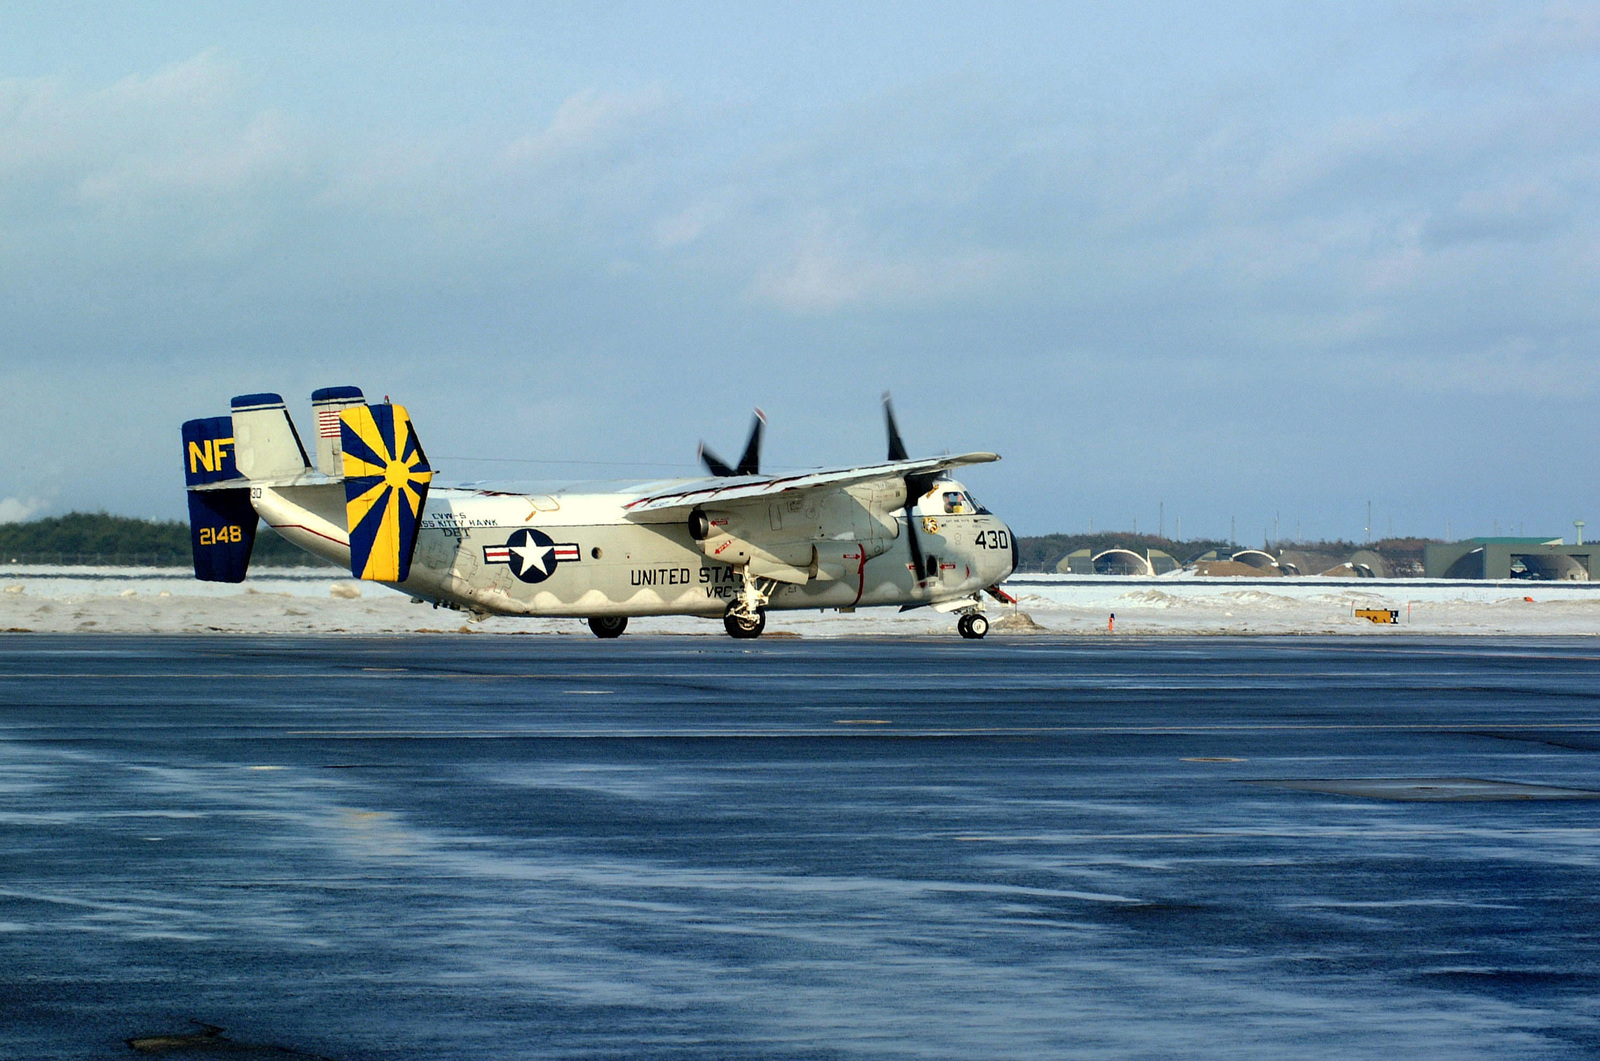 A Us Navy (Usn) C-2A Greyhound, Carrier Onboard Delivery (Cod) Aircraft  Assigned To Carrier Air Wing Five (Cvw-5), Fleet Logistics Support Squadron  30 (Vrc-30), Taxies Down The Runway After Landing At Misawa,